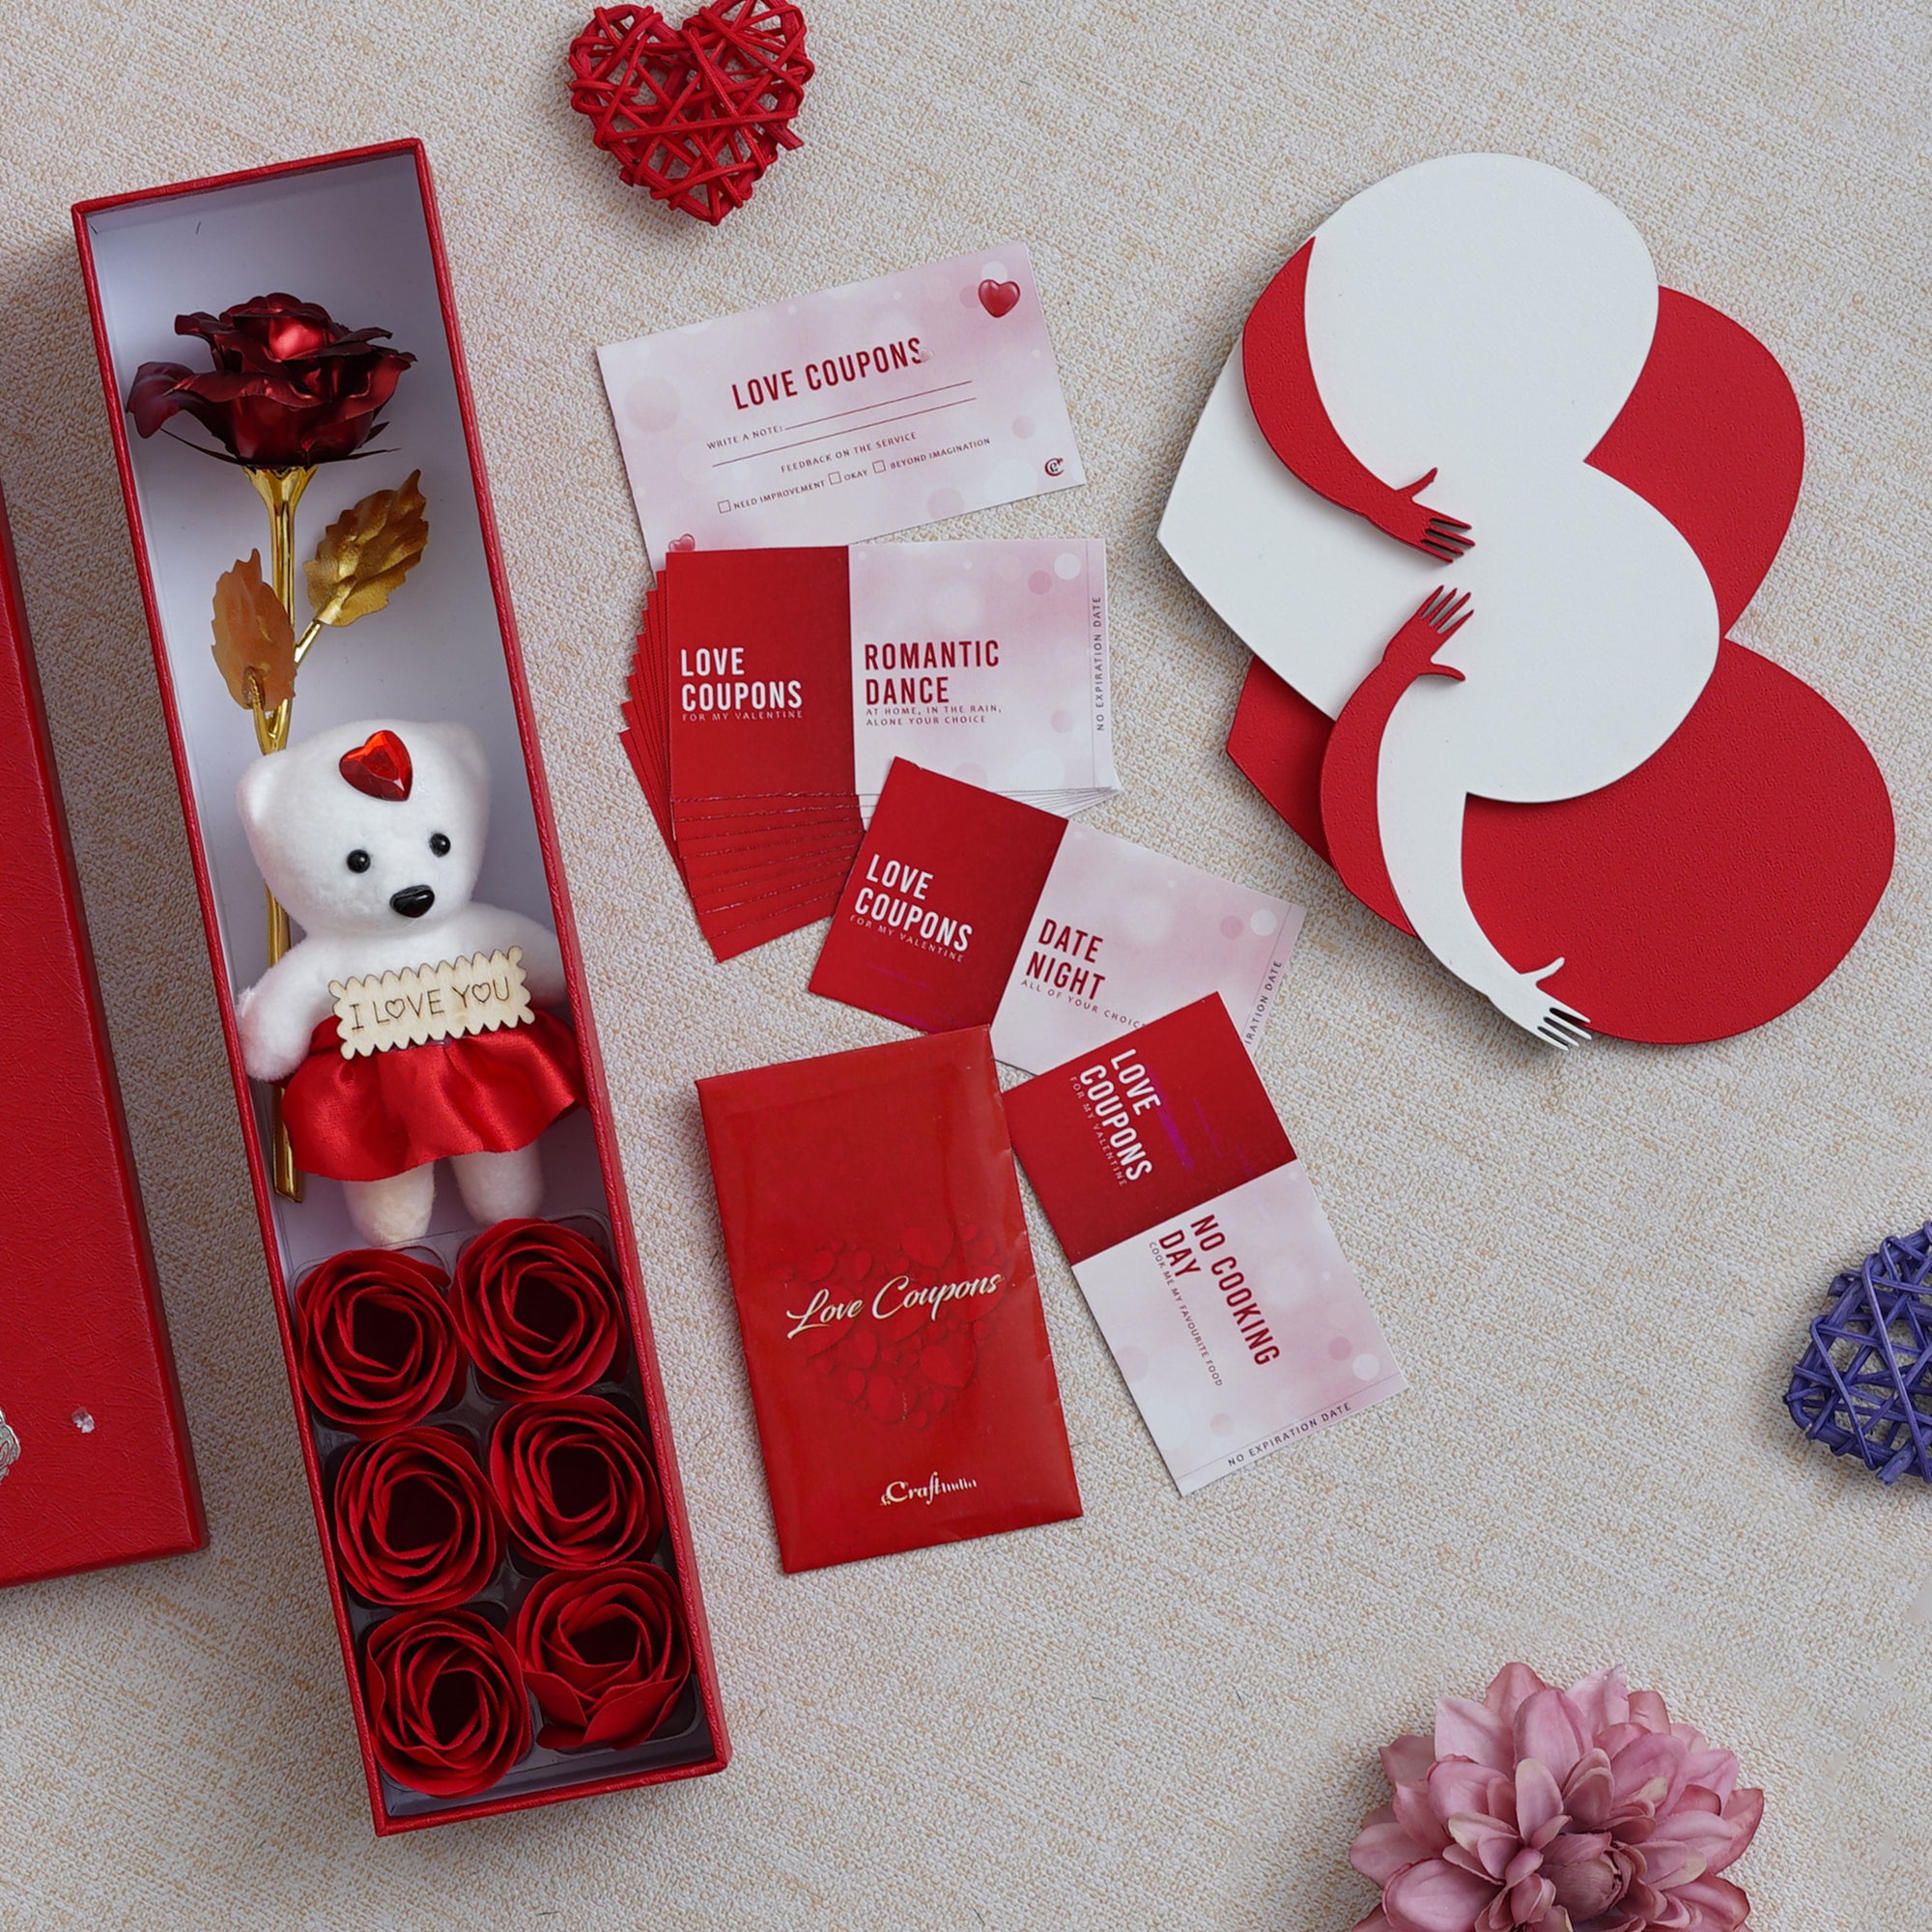 Valentine Combo of Pack of 12 Love Coupons Gift Cards Set, Red Gift Box with Teddy & Roses, Red and White Heart Hugging Each Other Gift Set